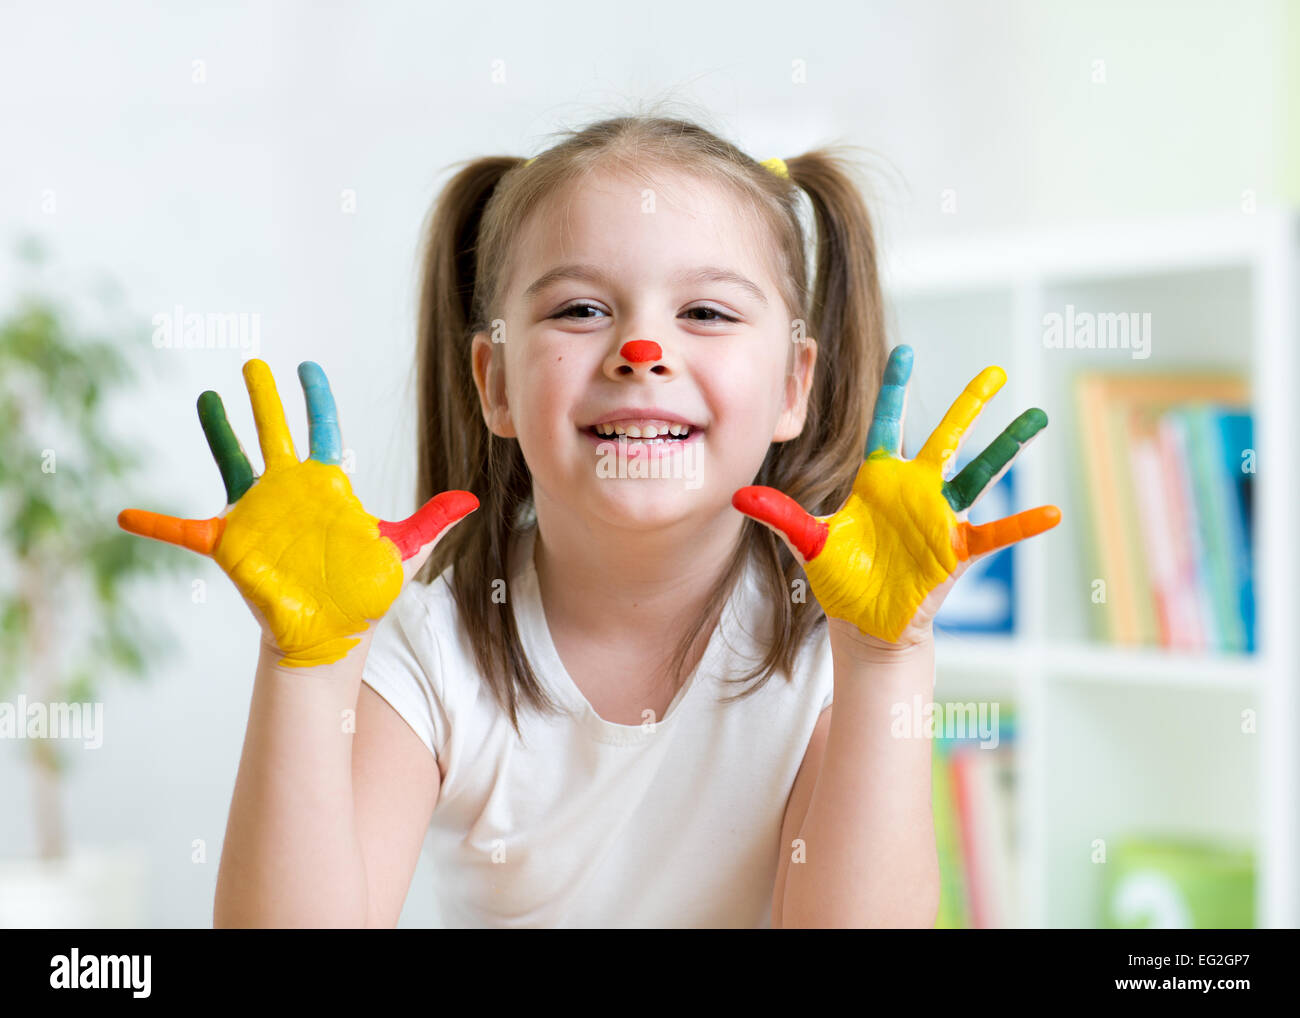 cute kid child showing her hands painted in bright colors Stock Photo